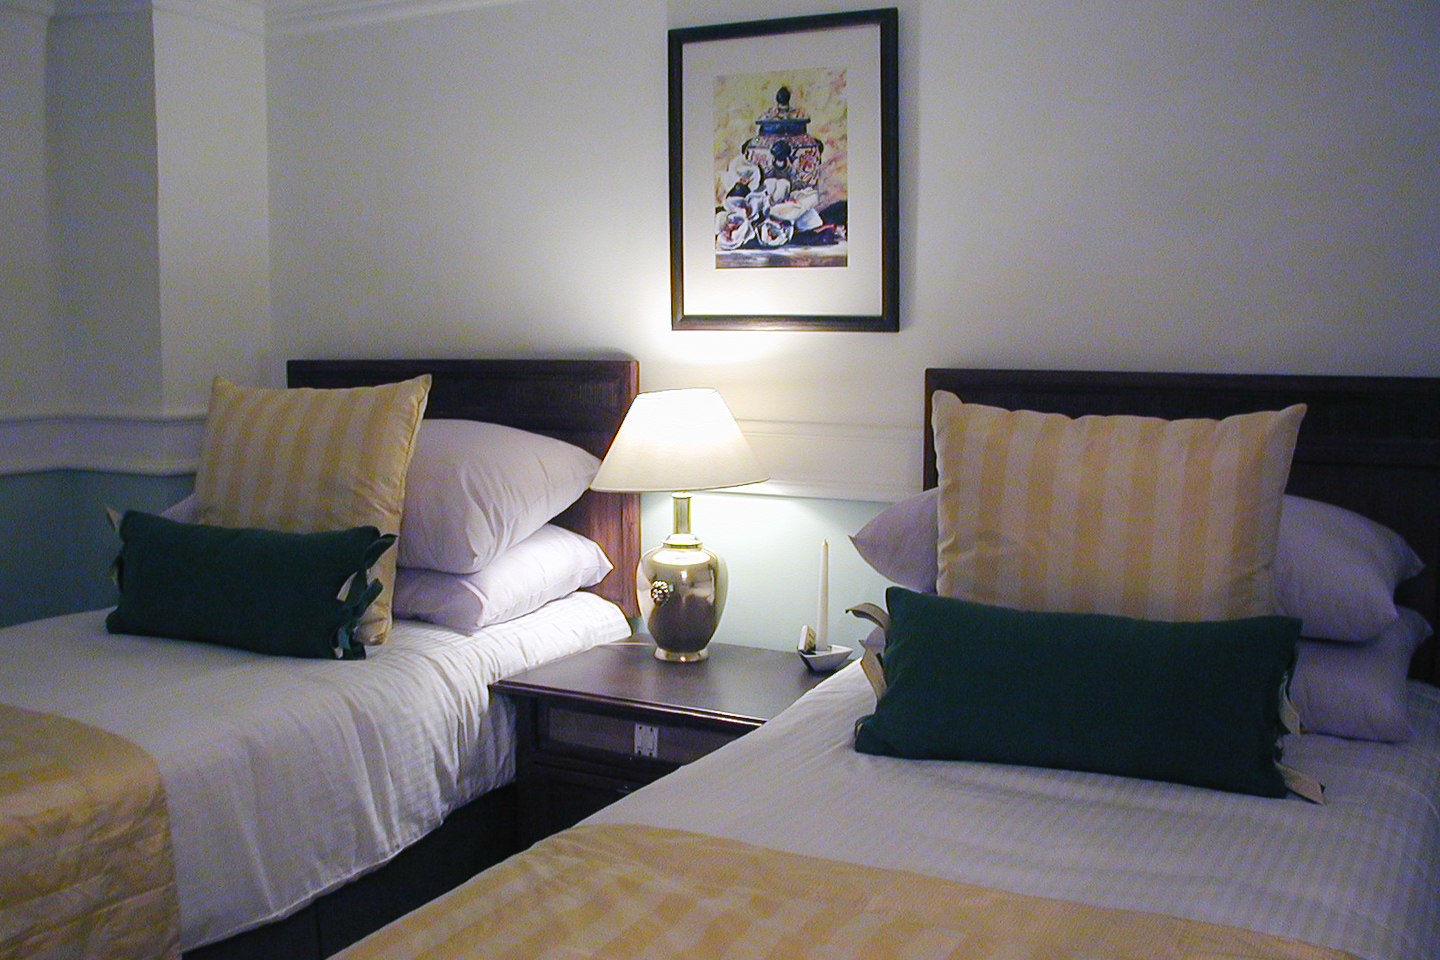 The green guest room has pale green walls with white highlights.